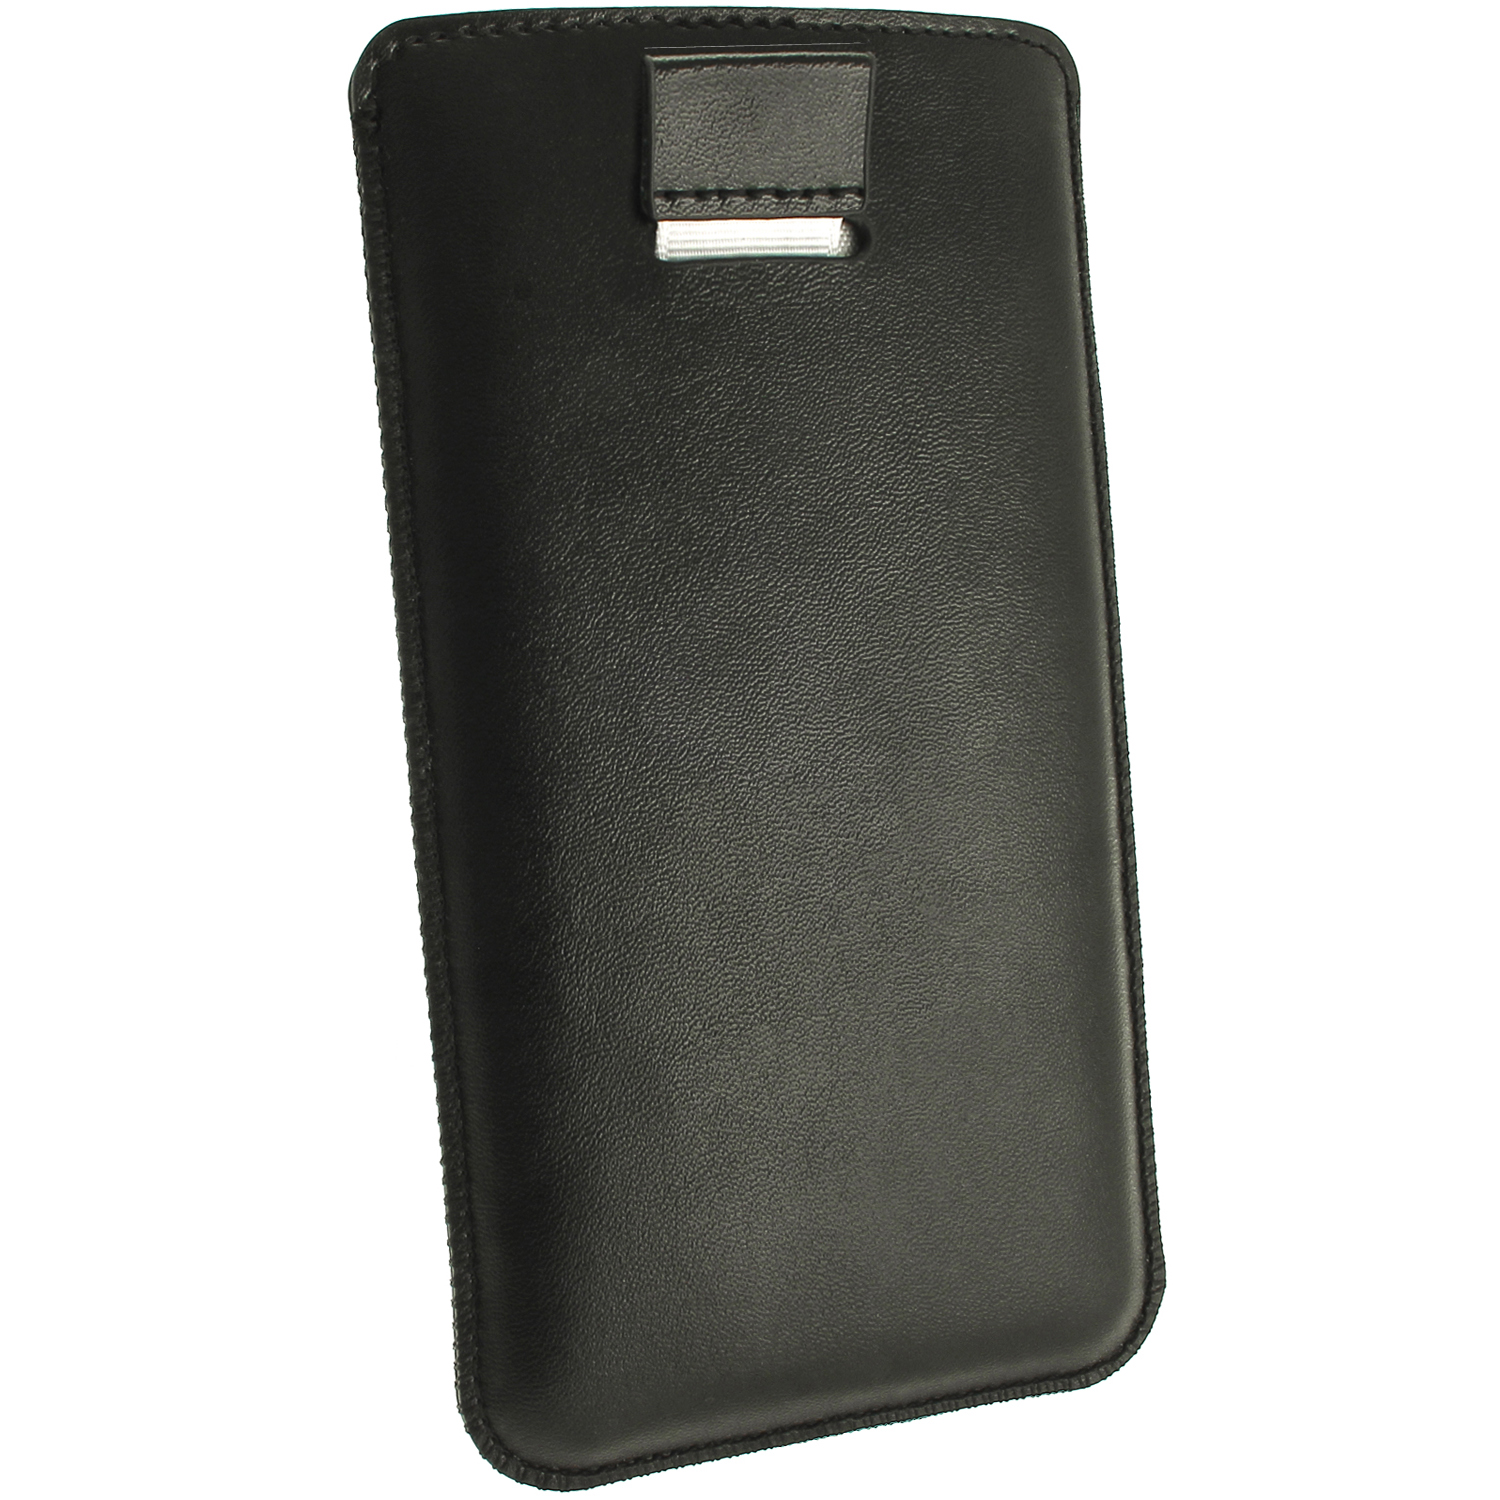 iGadgitz Black Leather Pouch Case Cover for HTC One Mini M4 Android ...